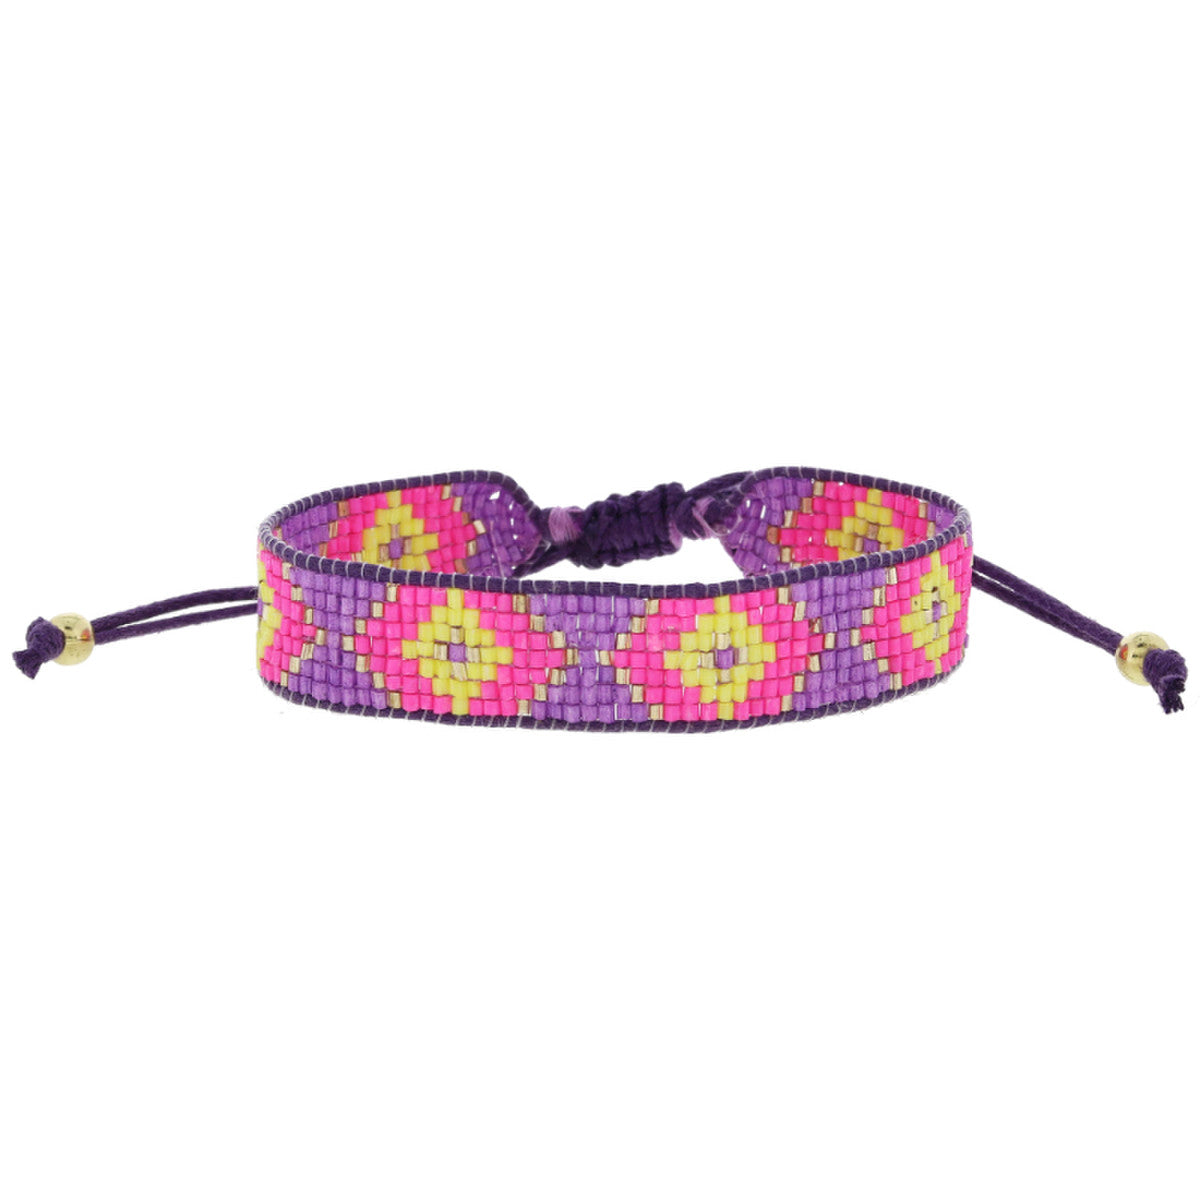 Purple, Pink, Lime and Gold Beaded Band Bracelet